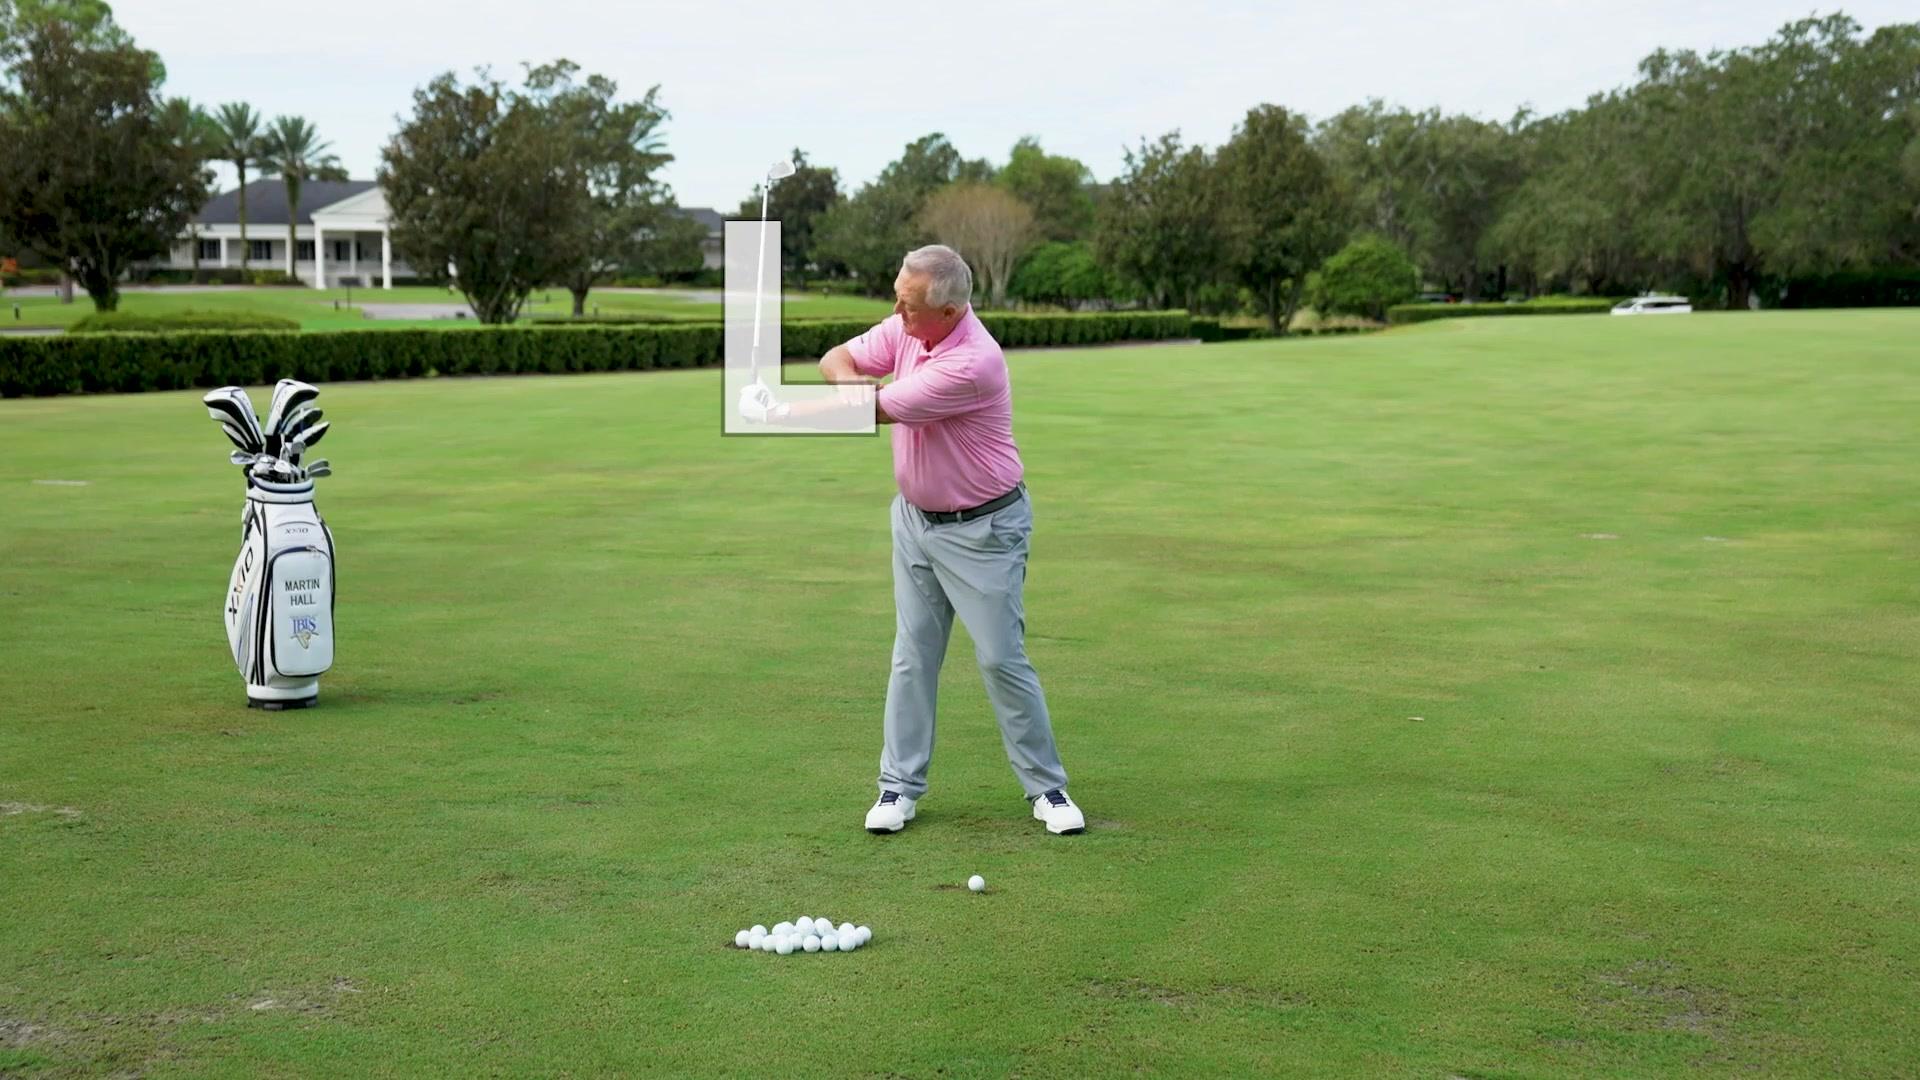 Flexibility for golf: Try this killer stretch to get more turn, How To